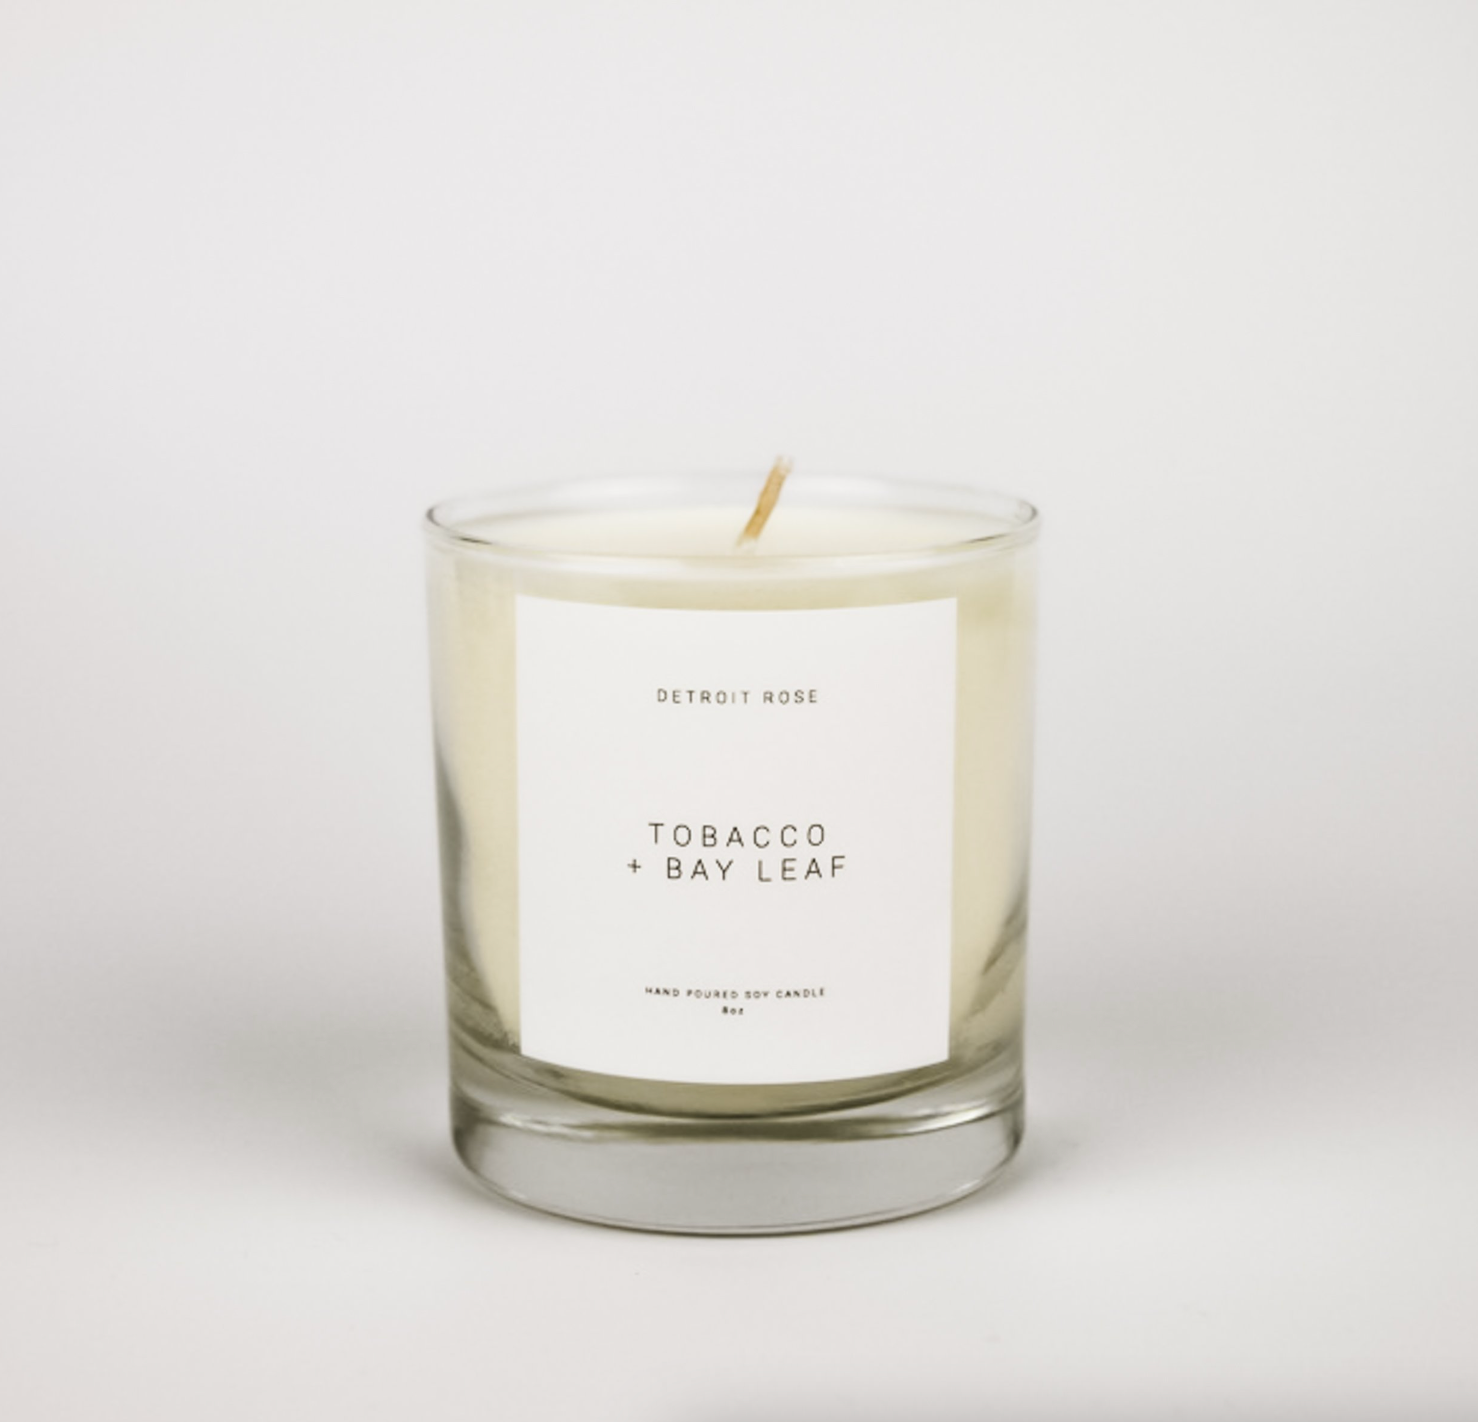 Product Image for Tobacco + Bay Leaf Candle